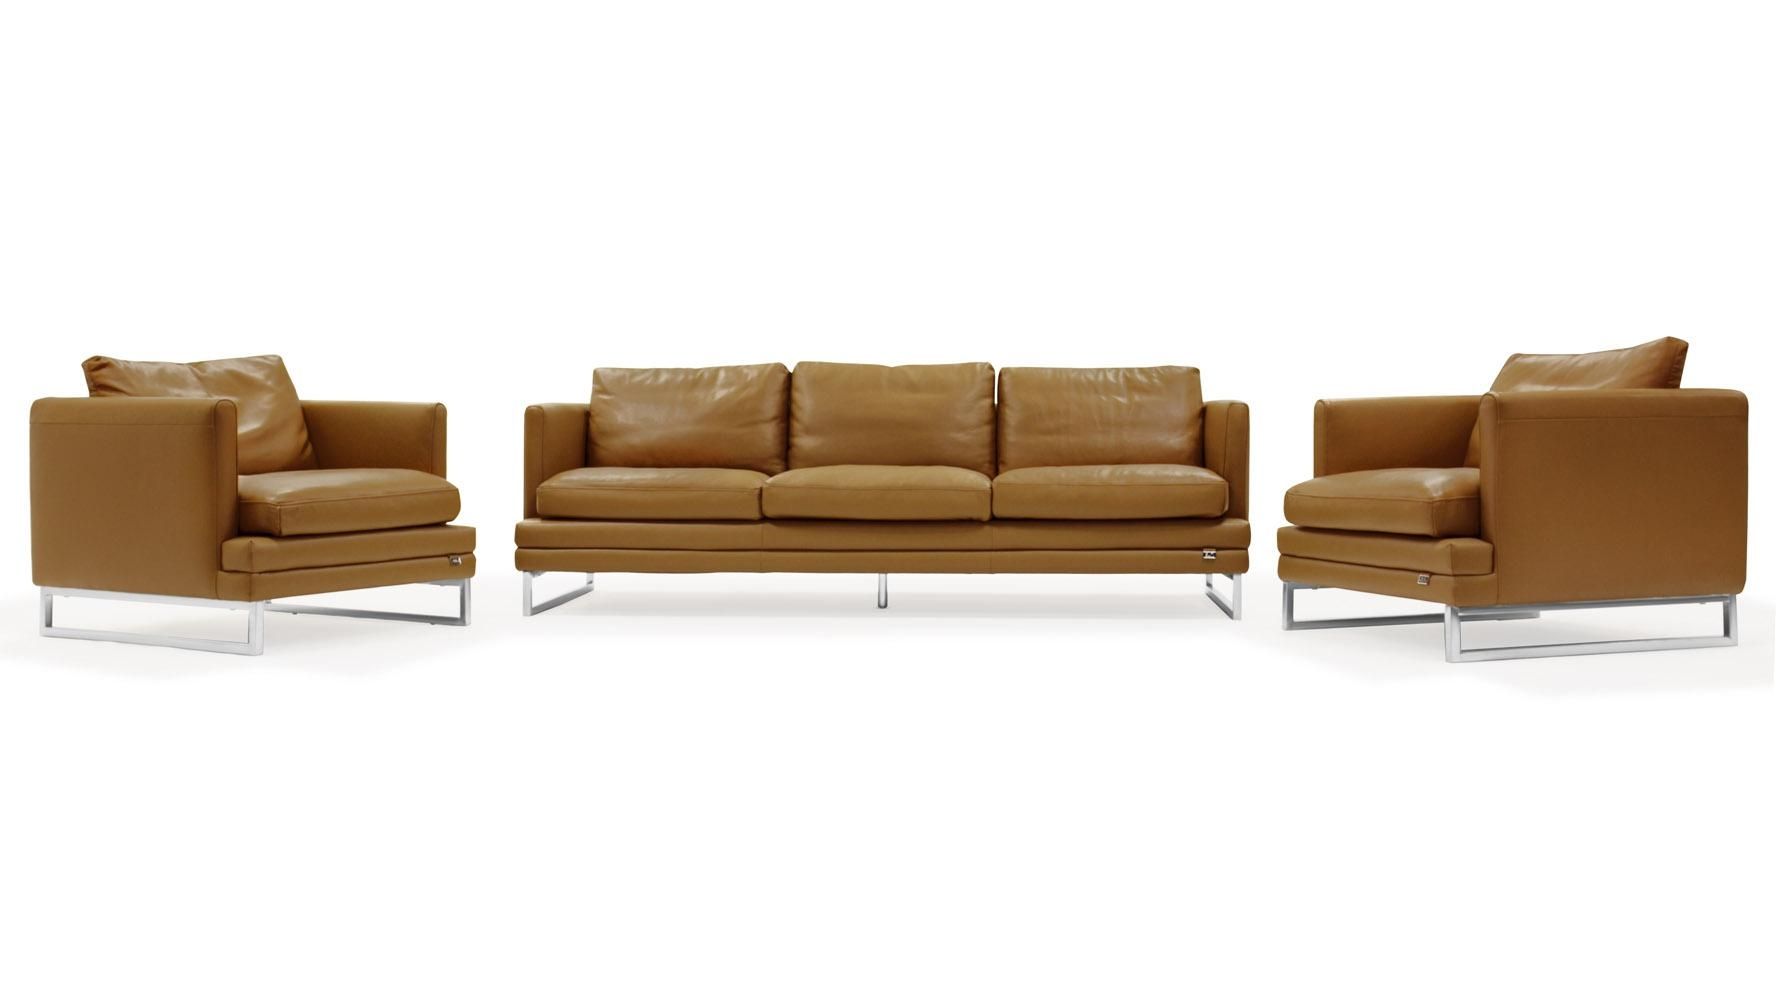 Modern Sofas & Contemporary Sofas : Modern Living Room Furniture With Contemporary Sofas And Chairs (View 7 of 20)